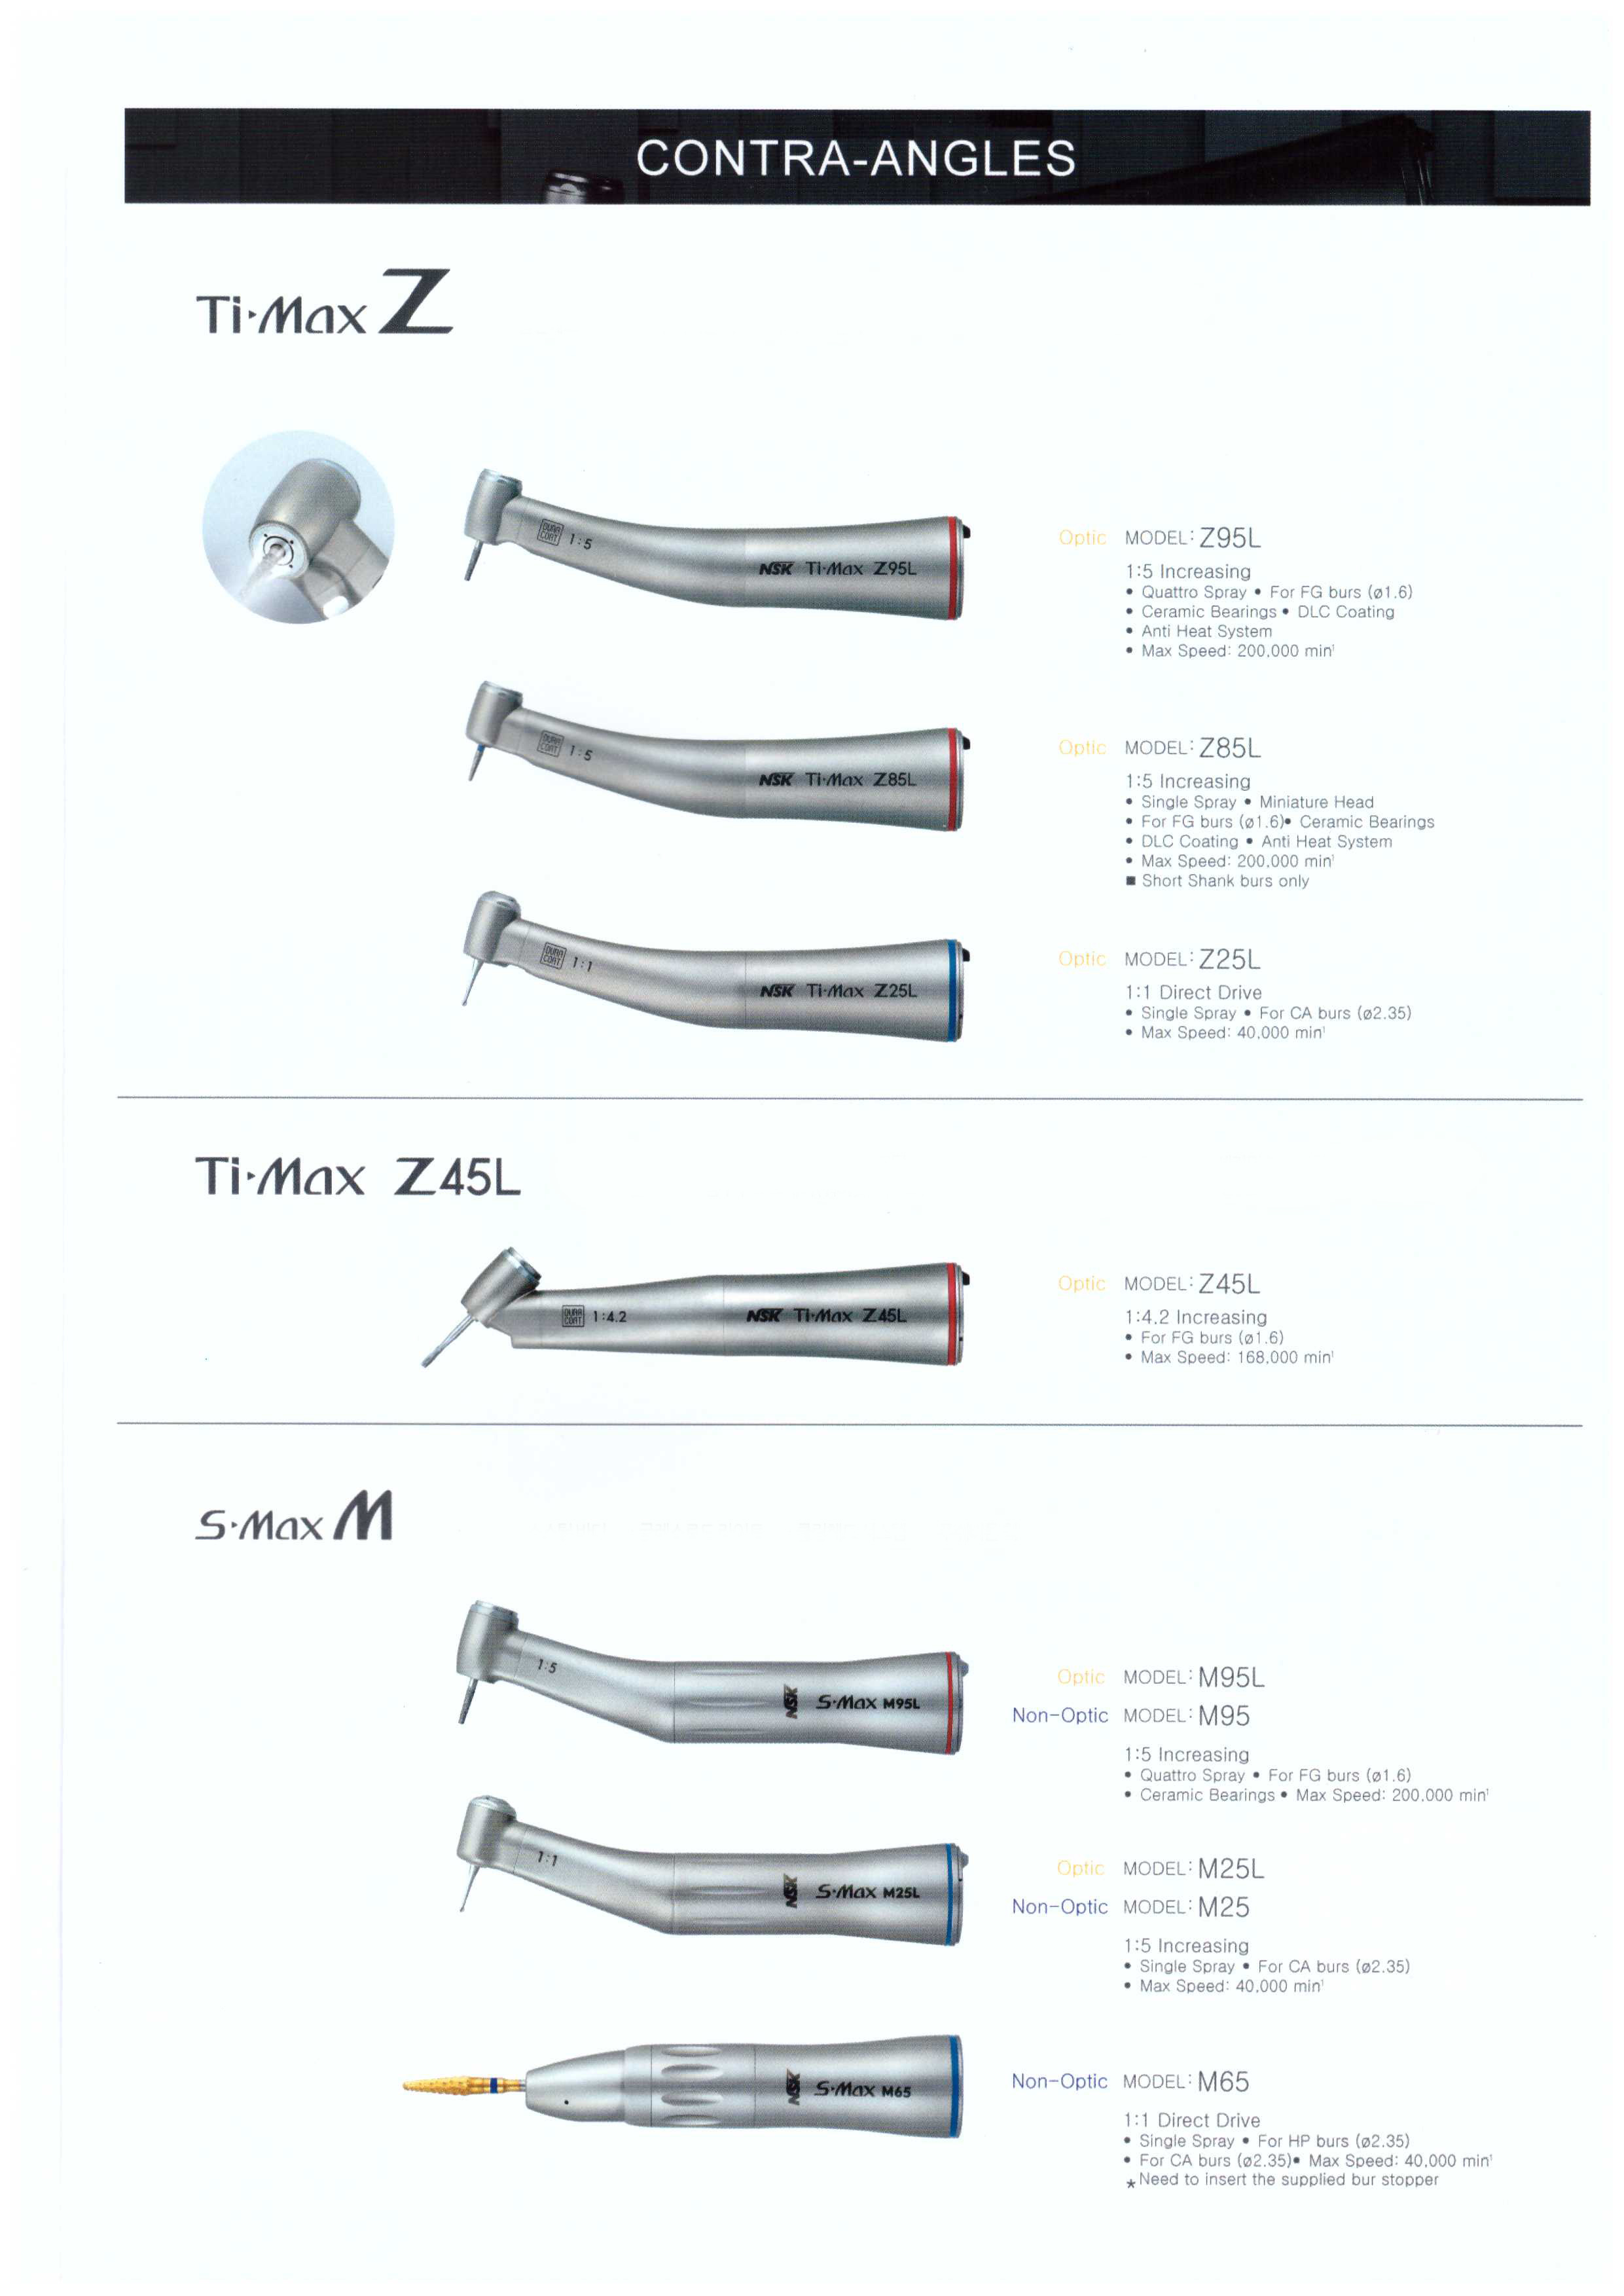 nsk_products_catalogue_2.jpg